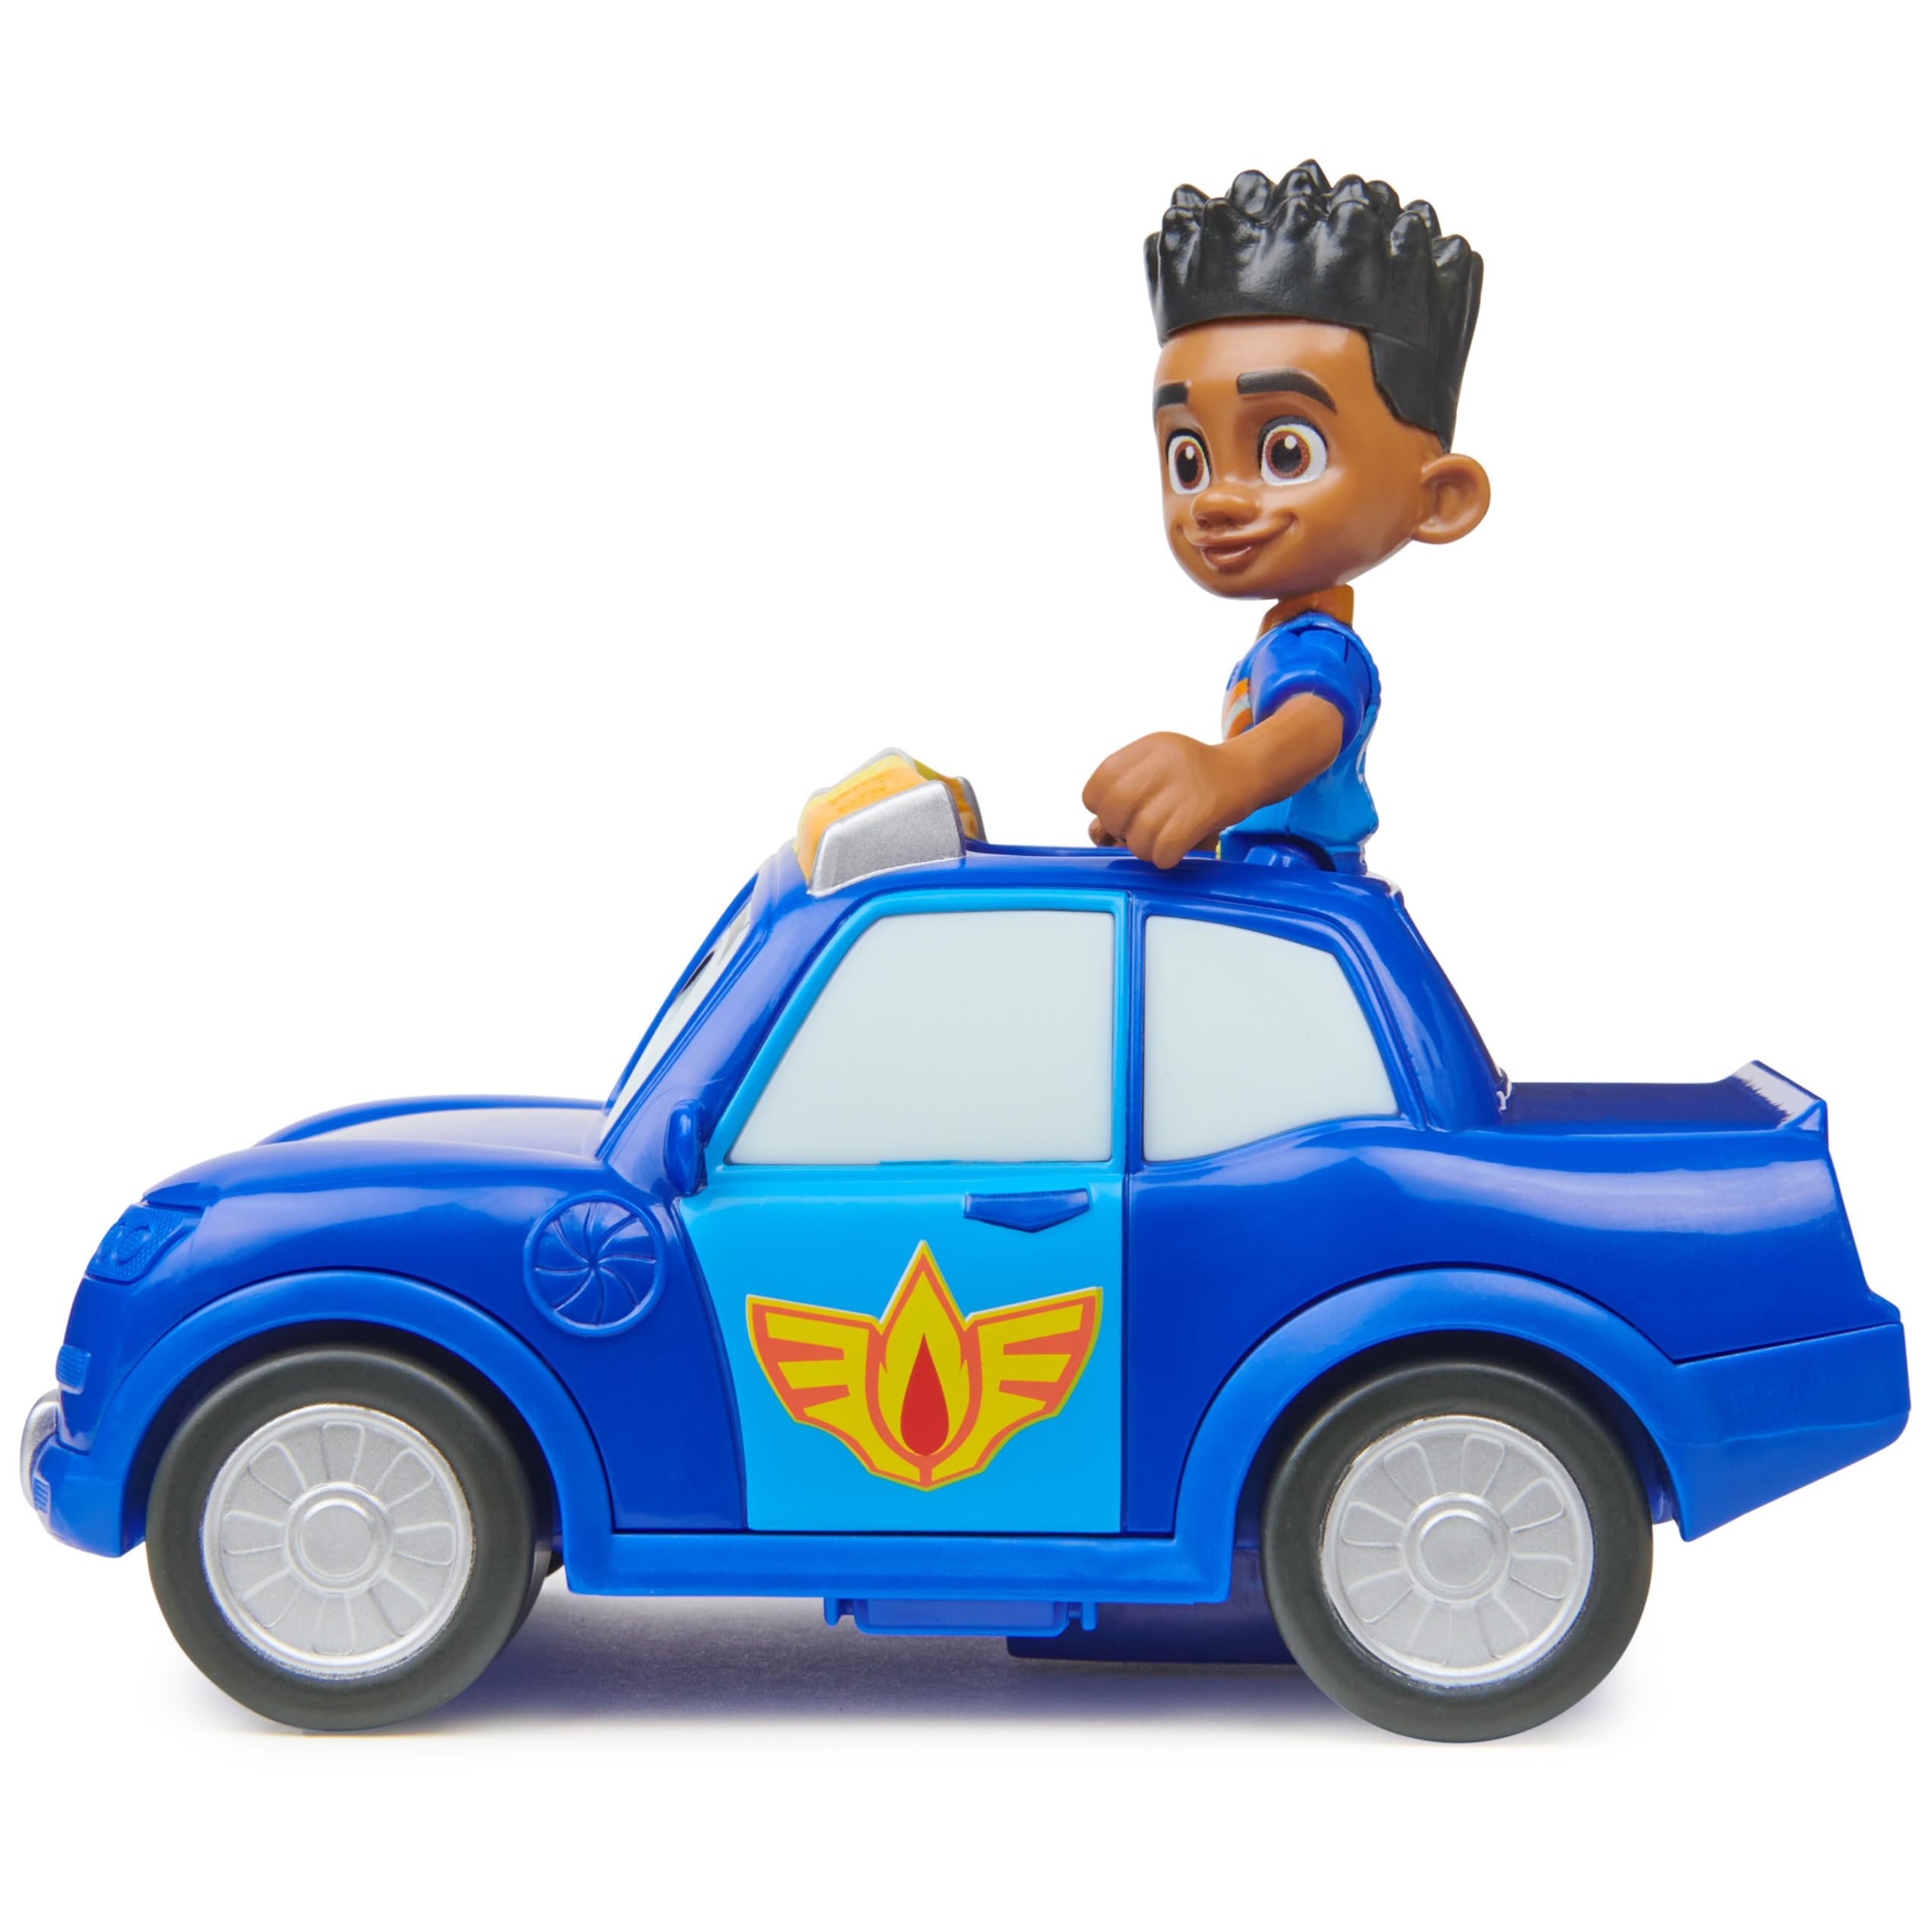 Disney Junior Firebuds, Jayden and Piston, Action Figure and Police Car Toy with Interactive Eye Movement, Kids Toys for Boys and Girls Ages 3 and up